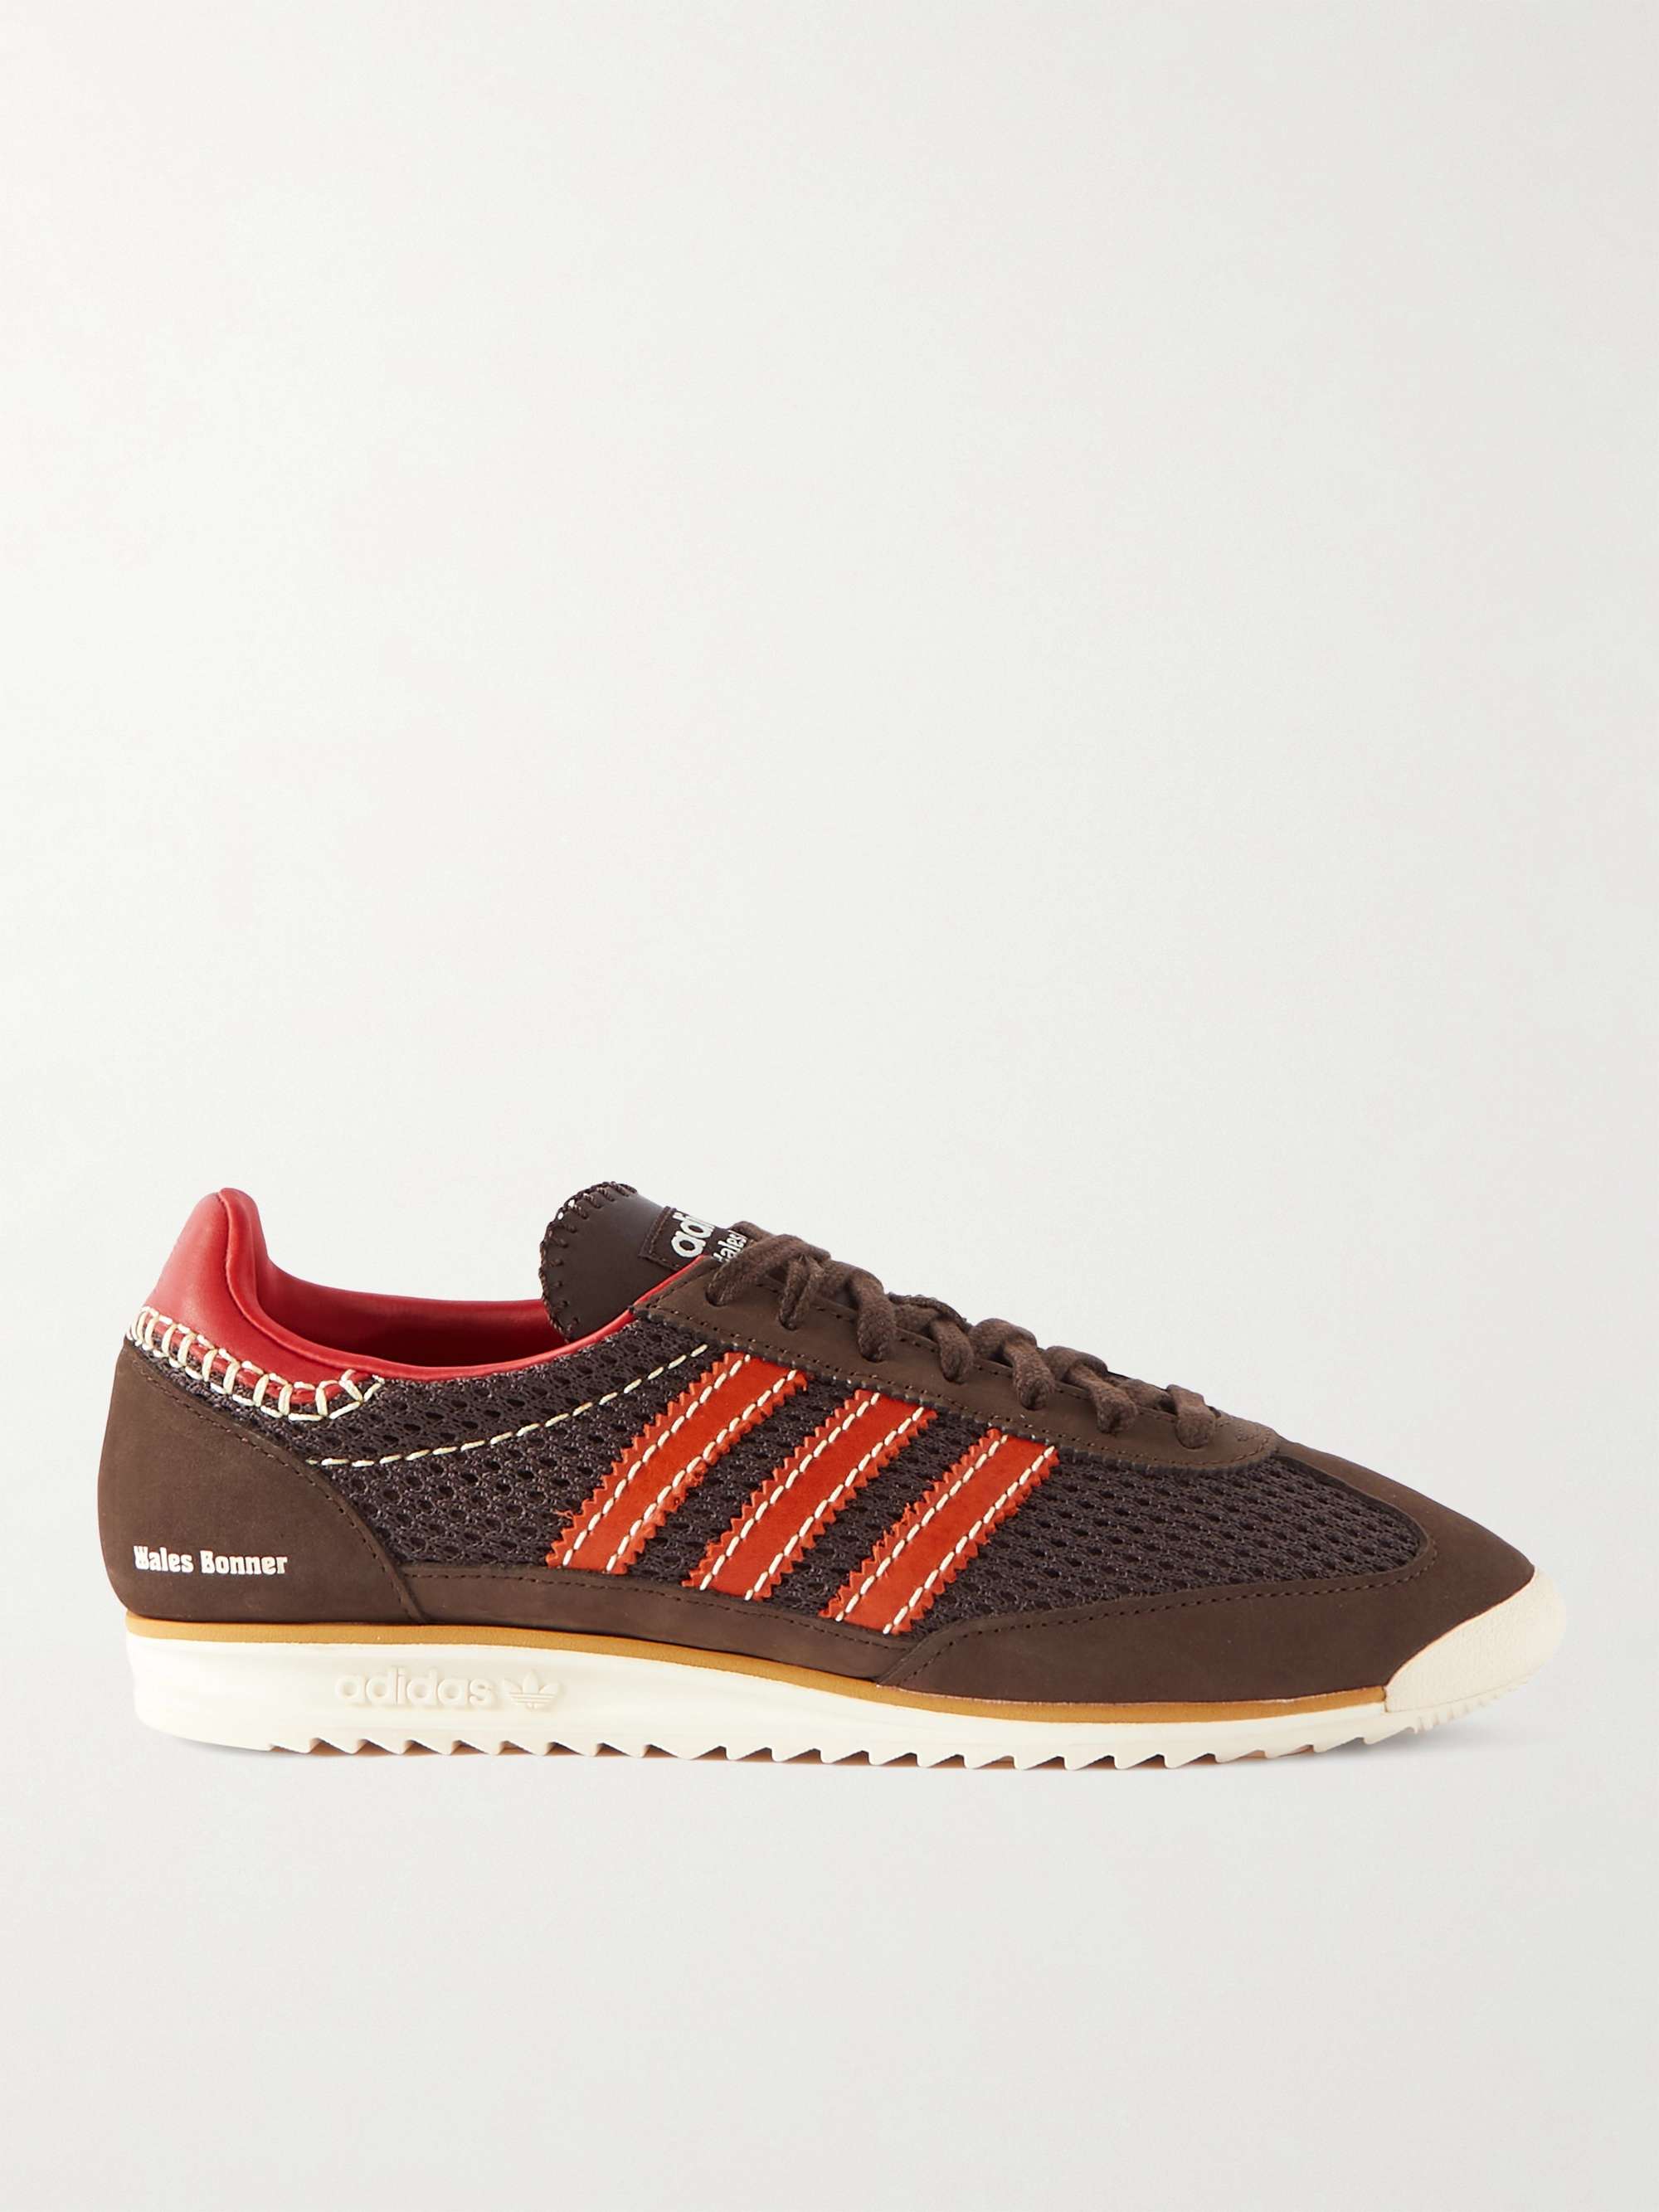 ADIDAS CONSORTIUM + Wales Bonner SL72 Suede and Mesh Sneakers | MR PORTER